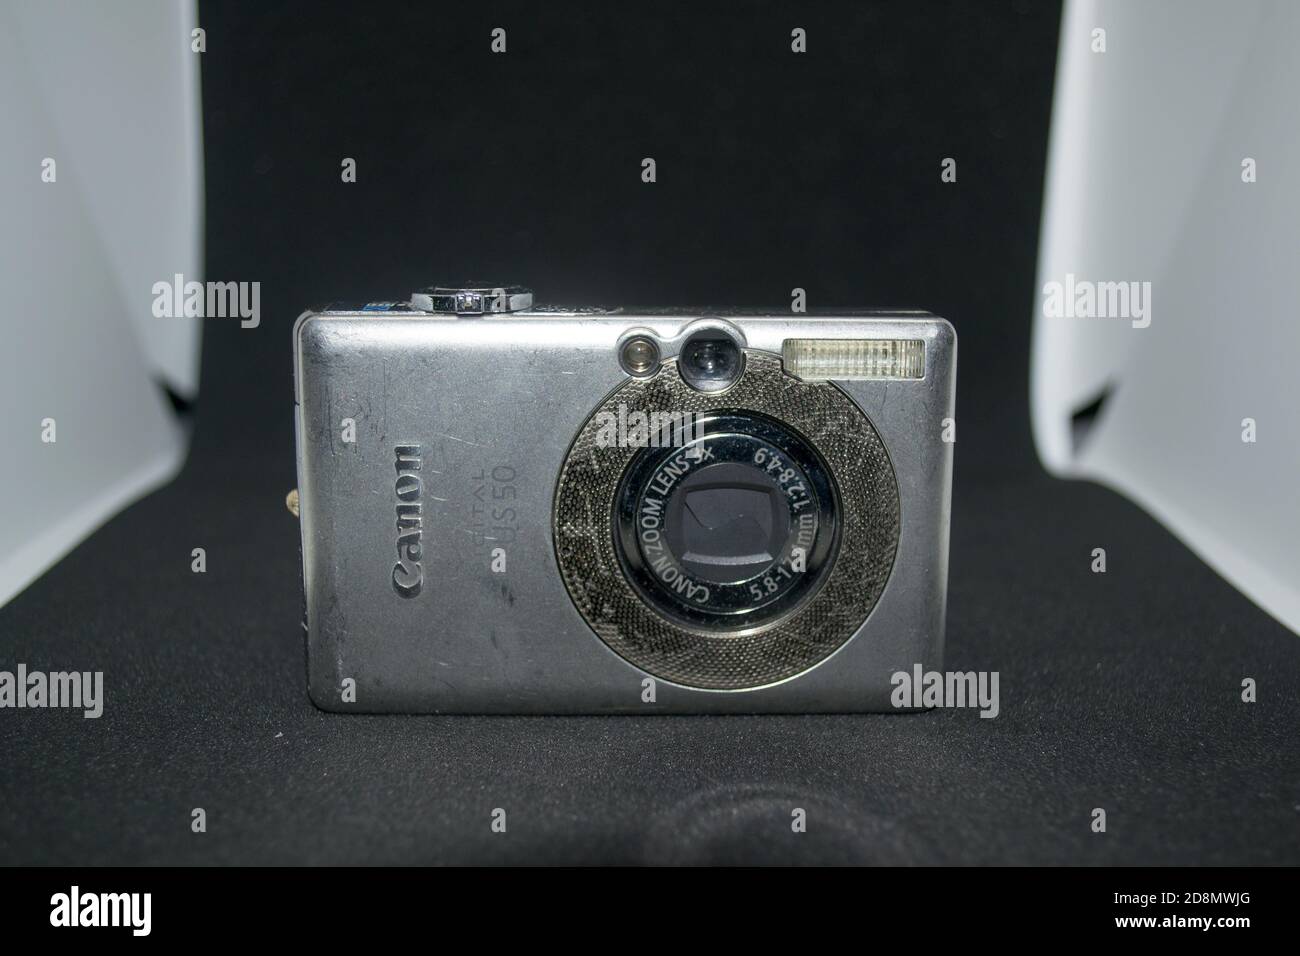 An old functioning Canon IXUS 50 digital camera isolated in a black and white background Stock Photo